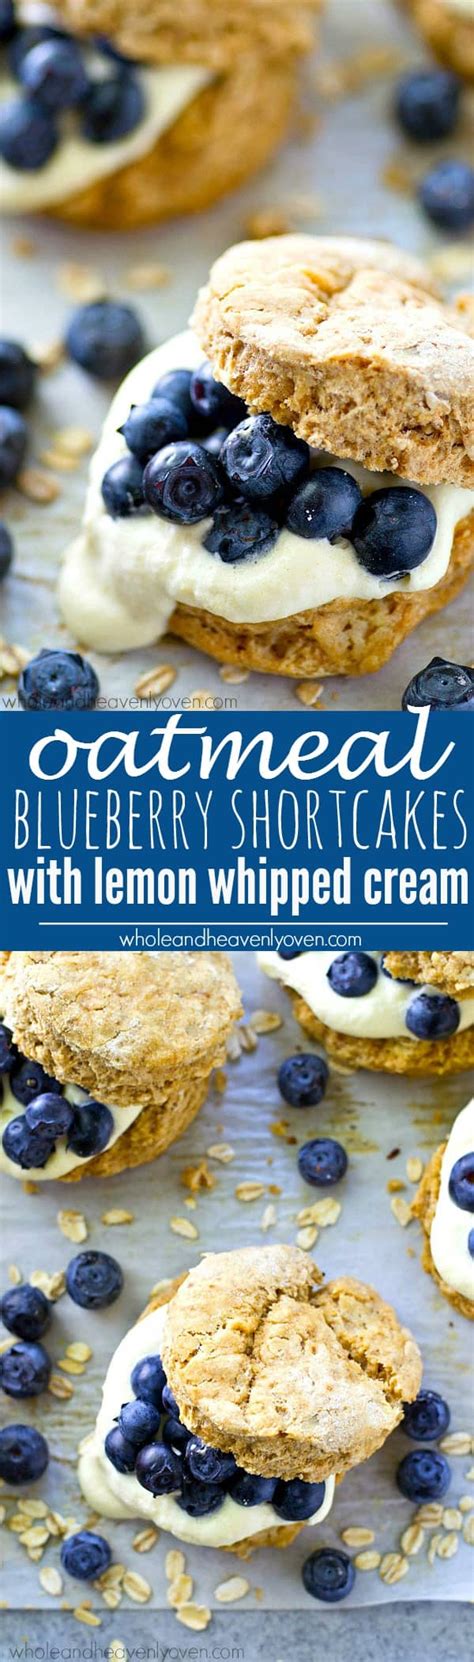 My mother (god rest her soul) tried to make biscuits for my dad, but the poor things were like little rocks. Oatmeal Blueberry Shortcakes with Lemon Whipped Cream